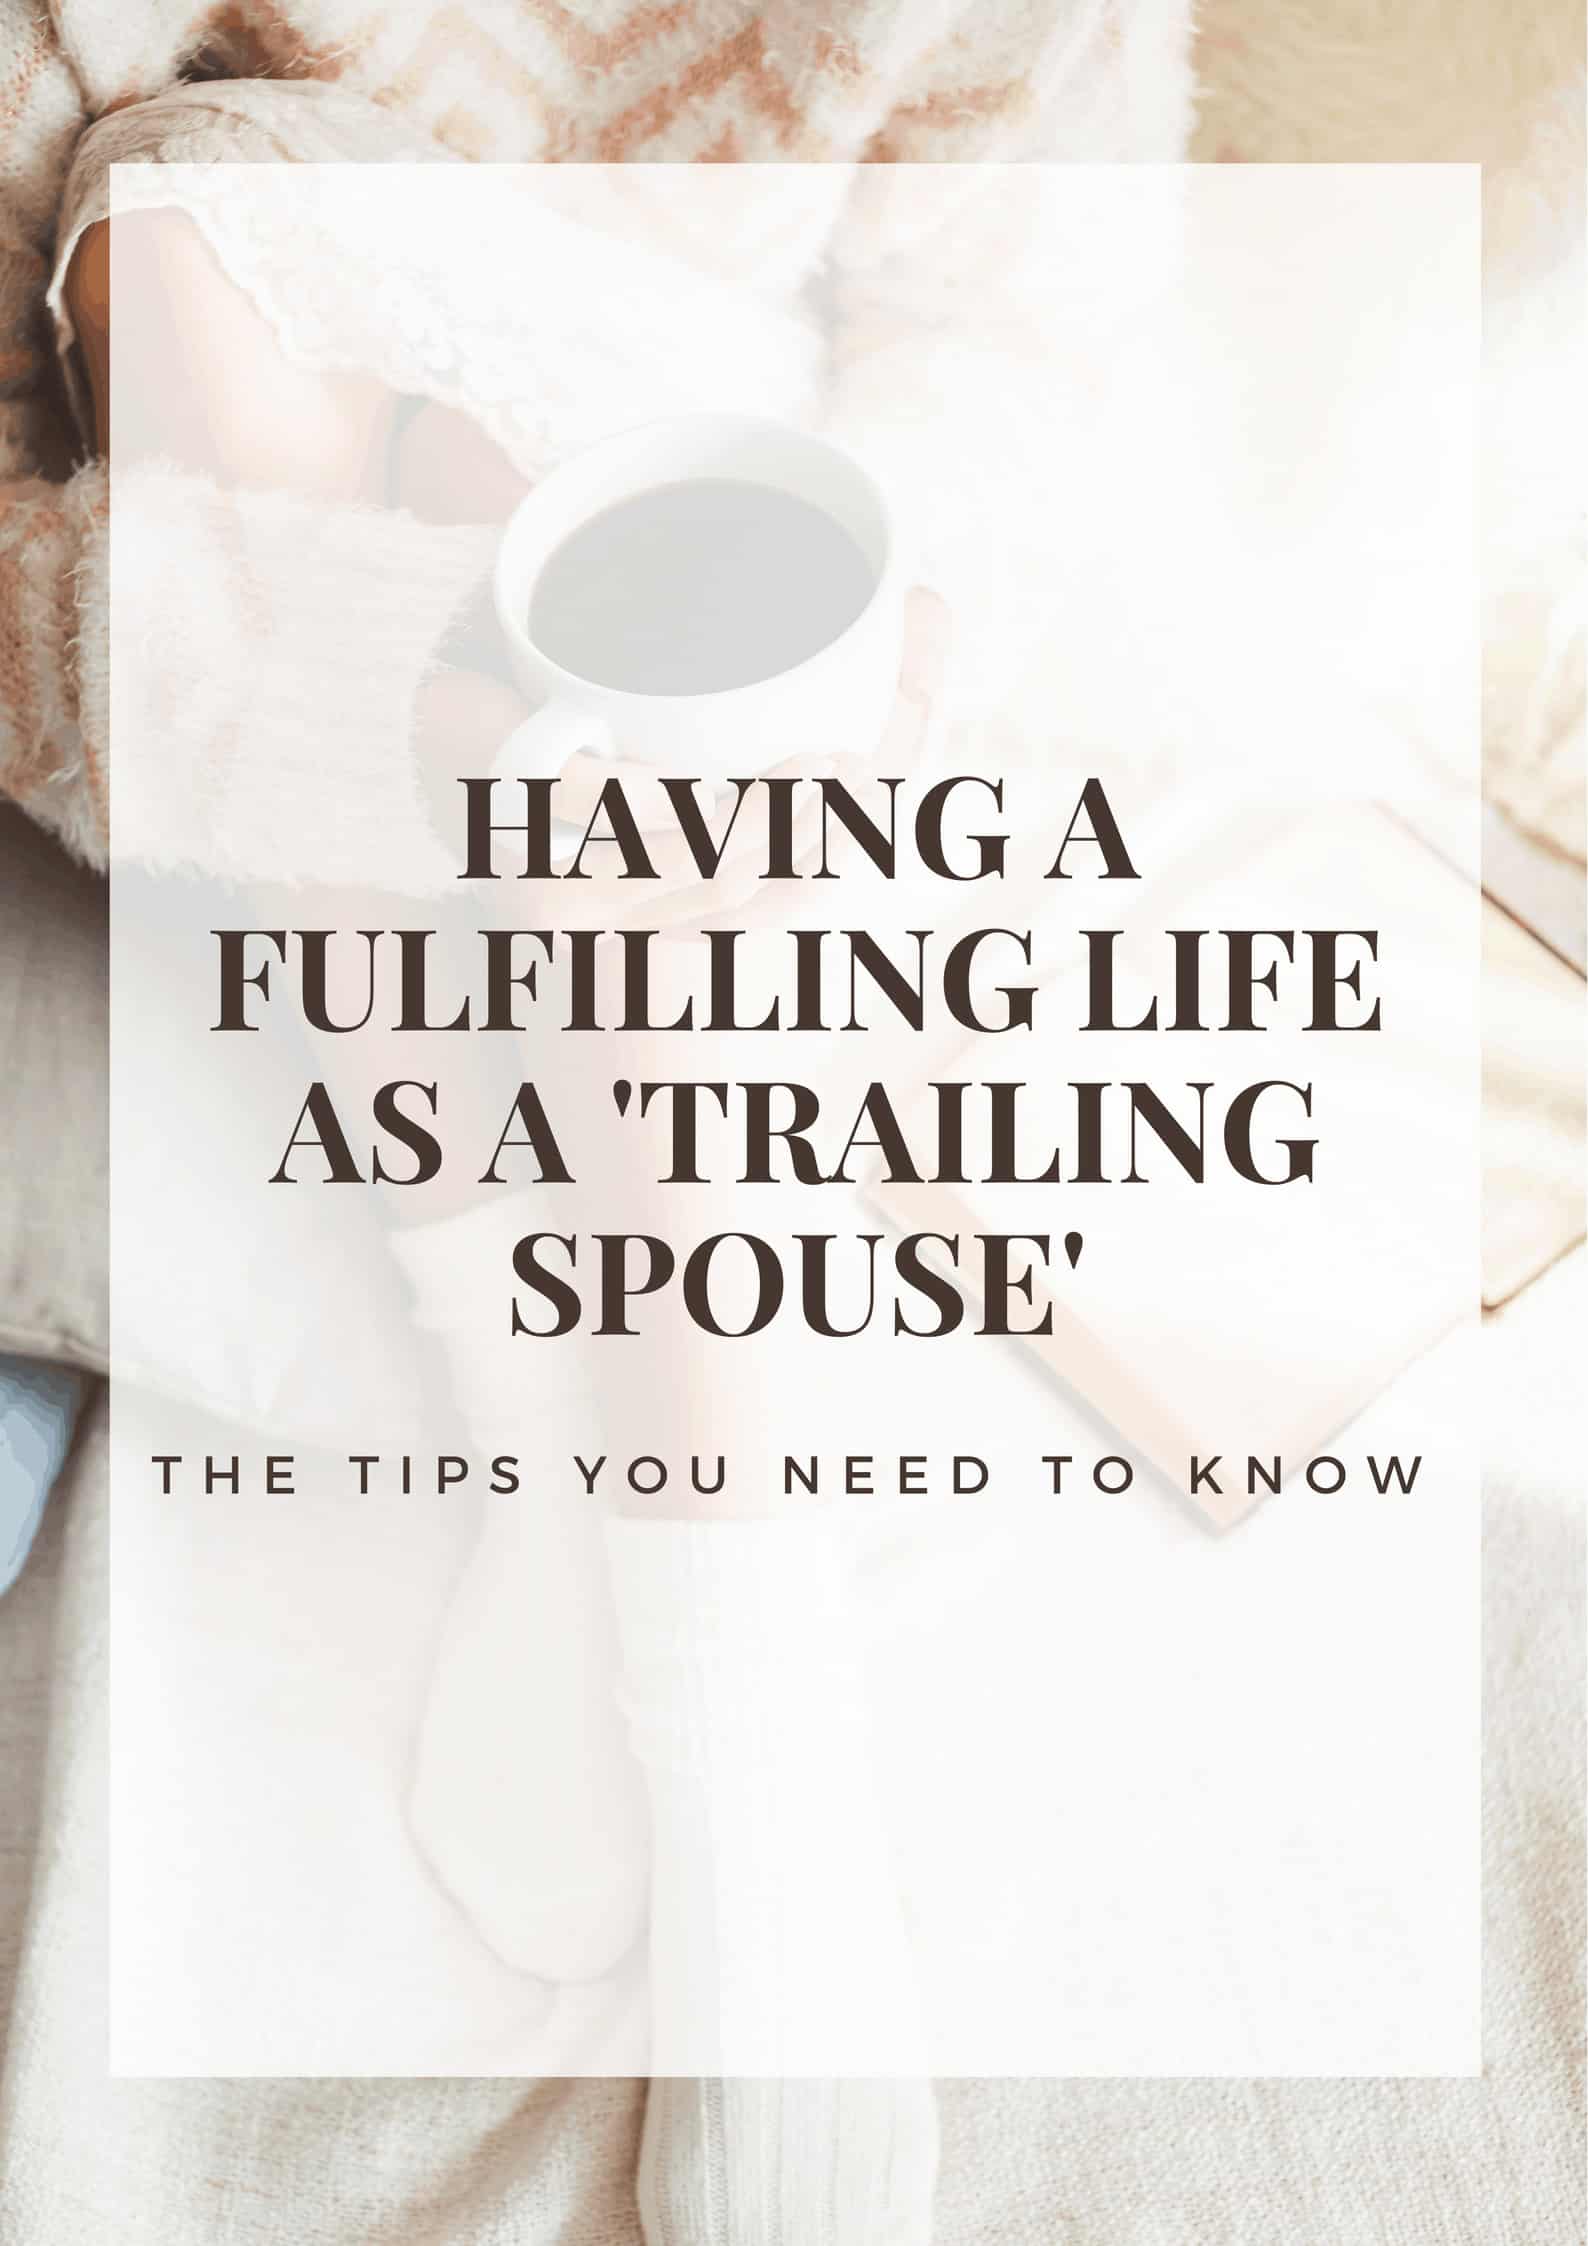 image with text over: having a fulfilling life as a trailing spouse